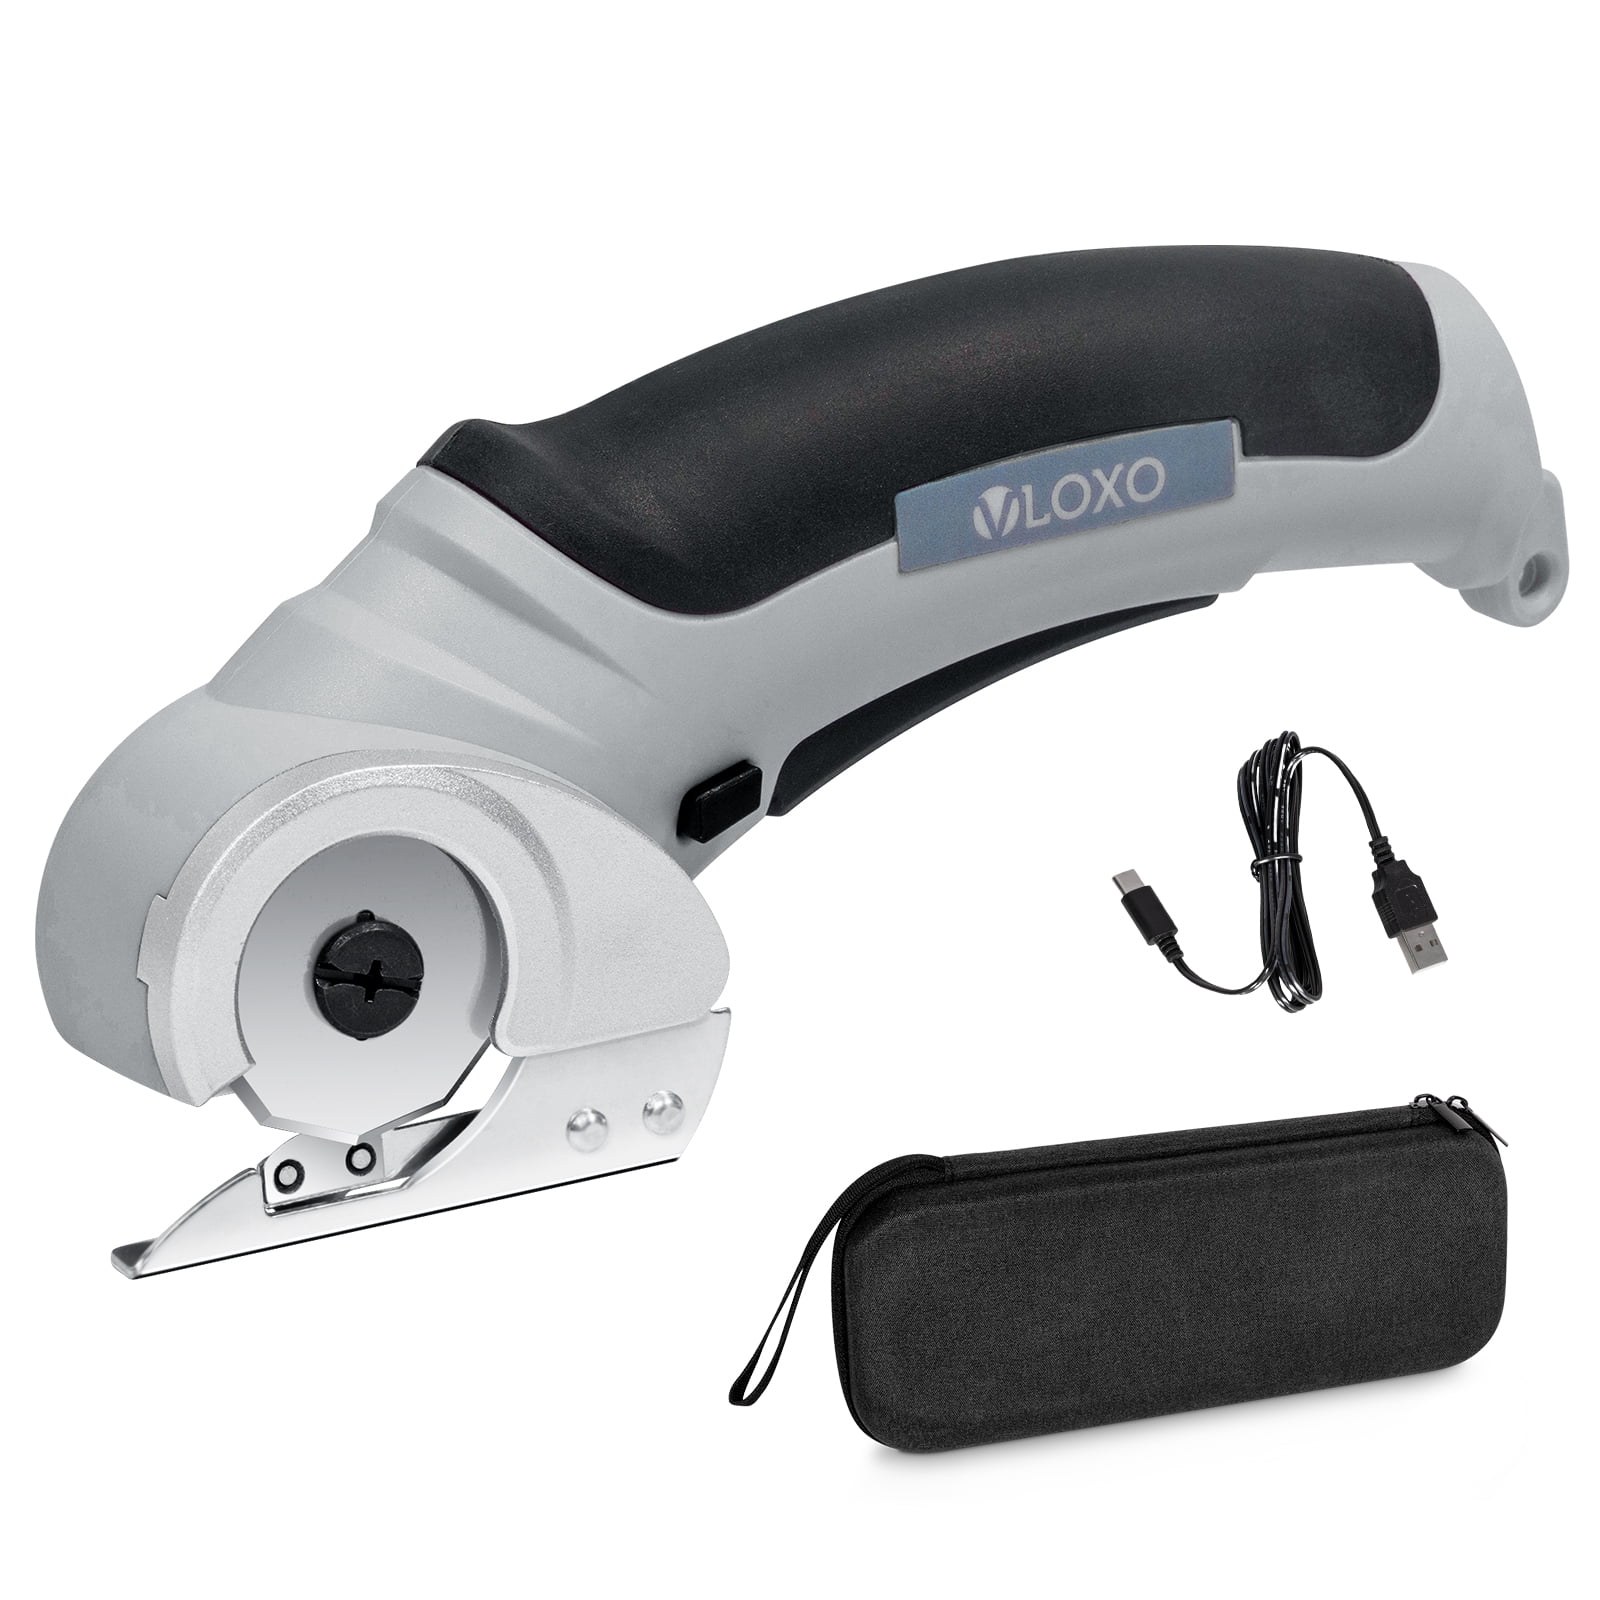  VLOXO Cordless Cardboard Cutter, Electric Fabric